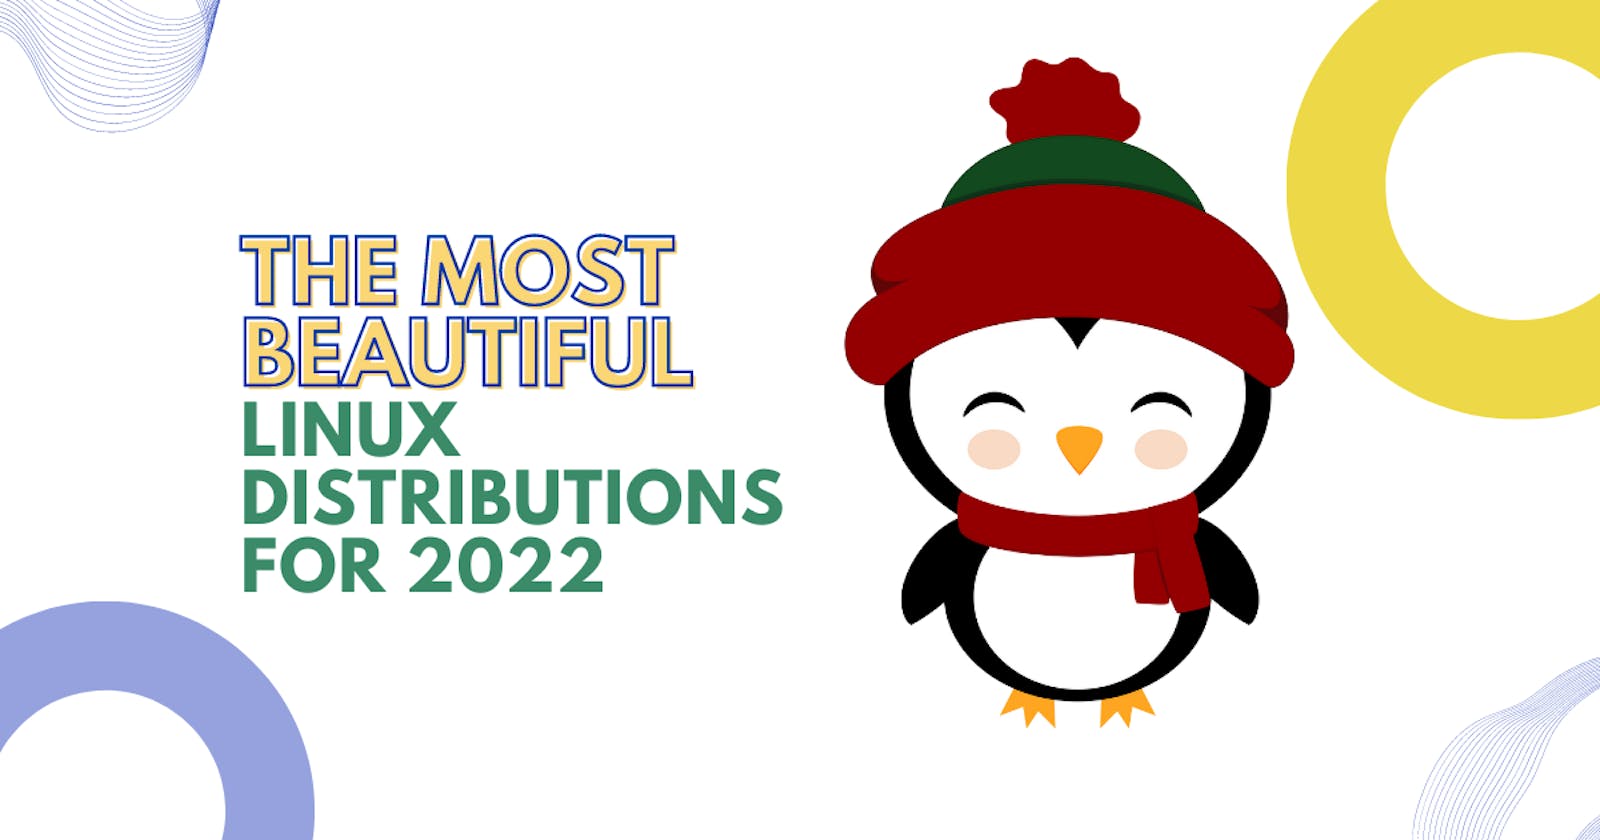 The Most Beautiful Linux Distributions for 2022